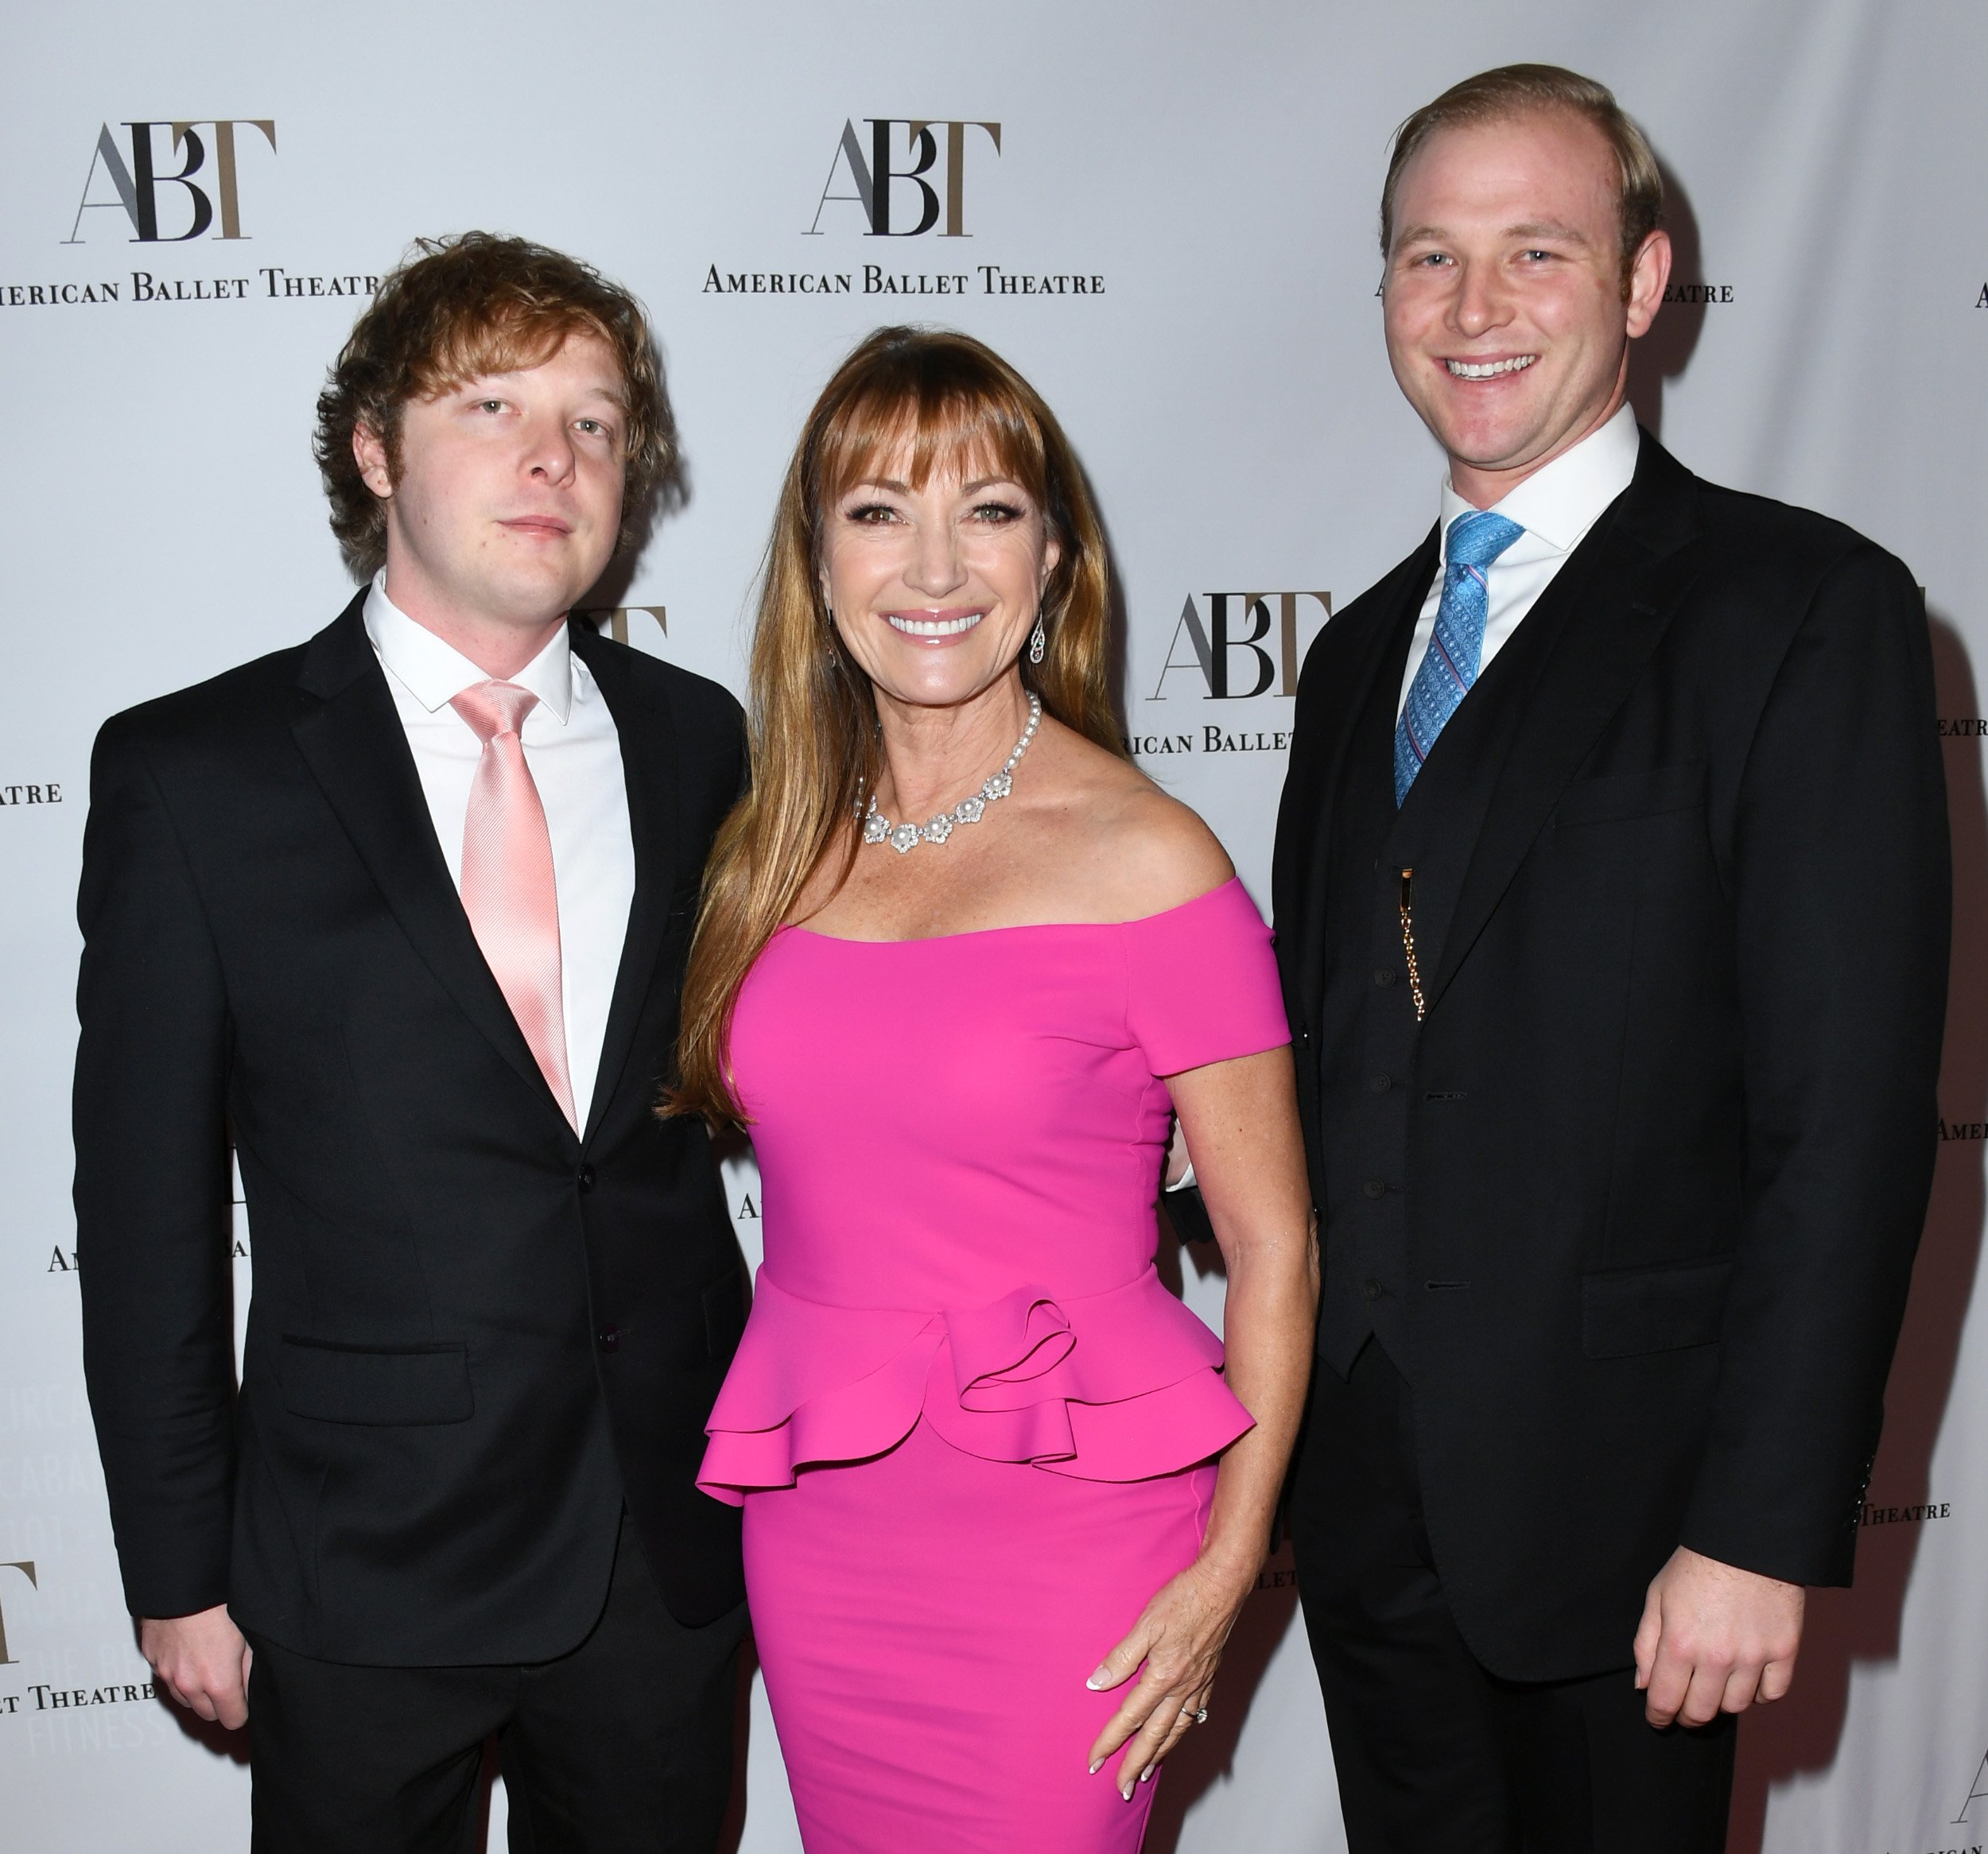 Jane Seymour and sons attend American Ballet Theatre's Annual Holiday Benefit at The Beverly Hilton Hotel on December 16, 2019 in Beverly Hills, California. (Photo by Jon Kopaloff/Getty Images)